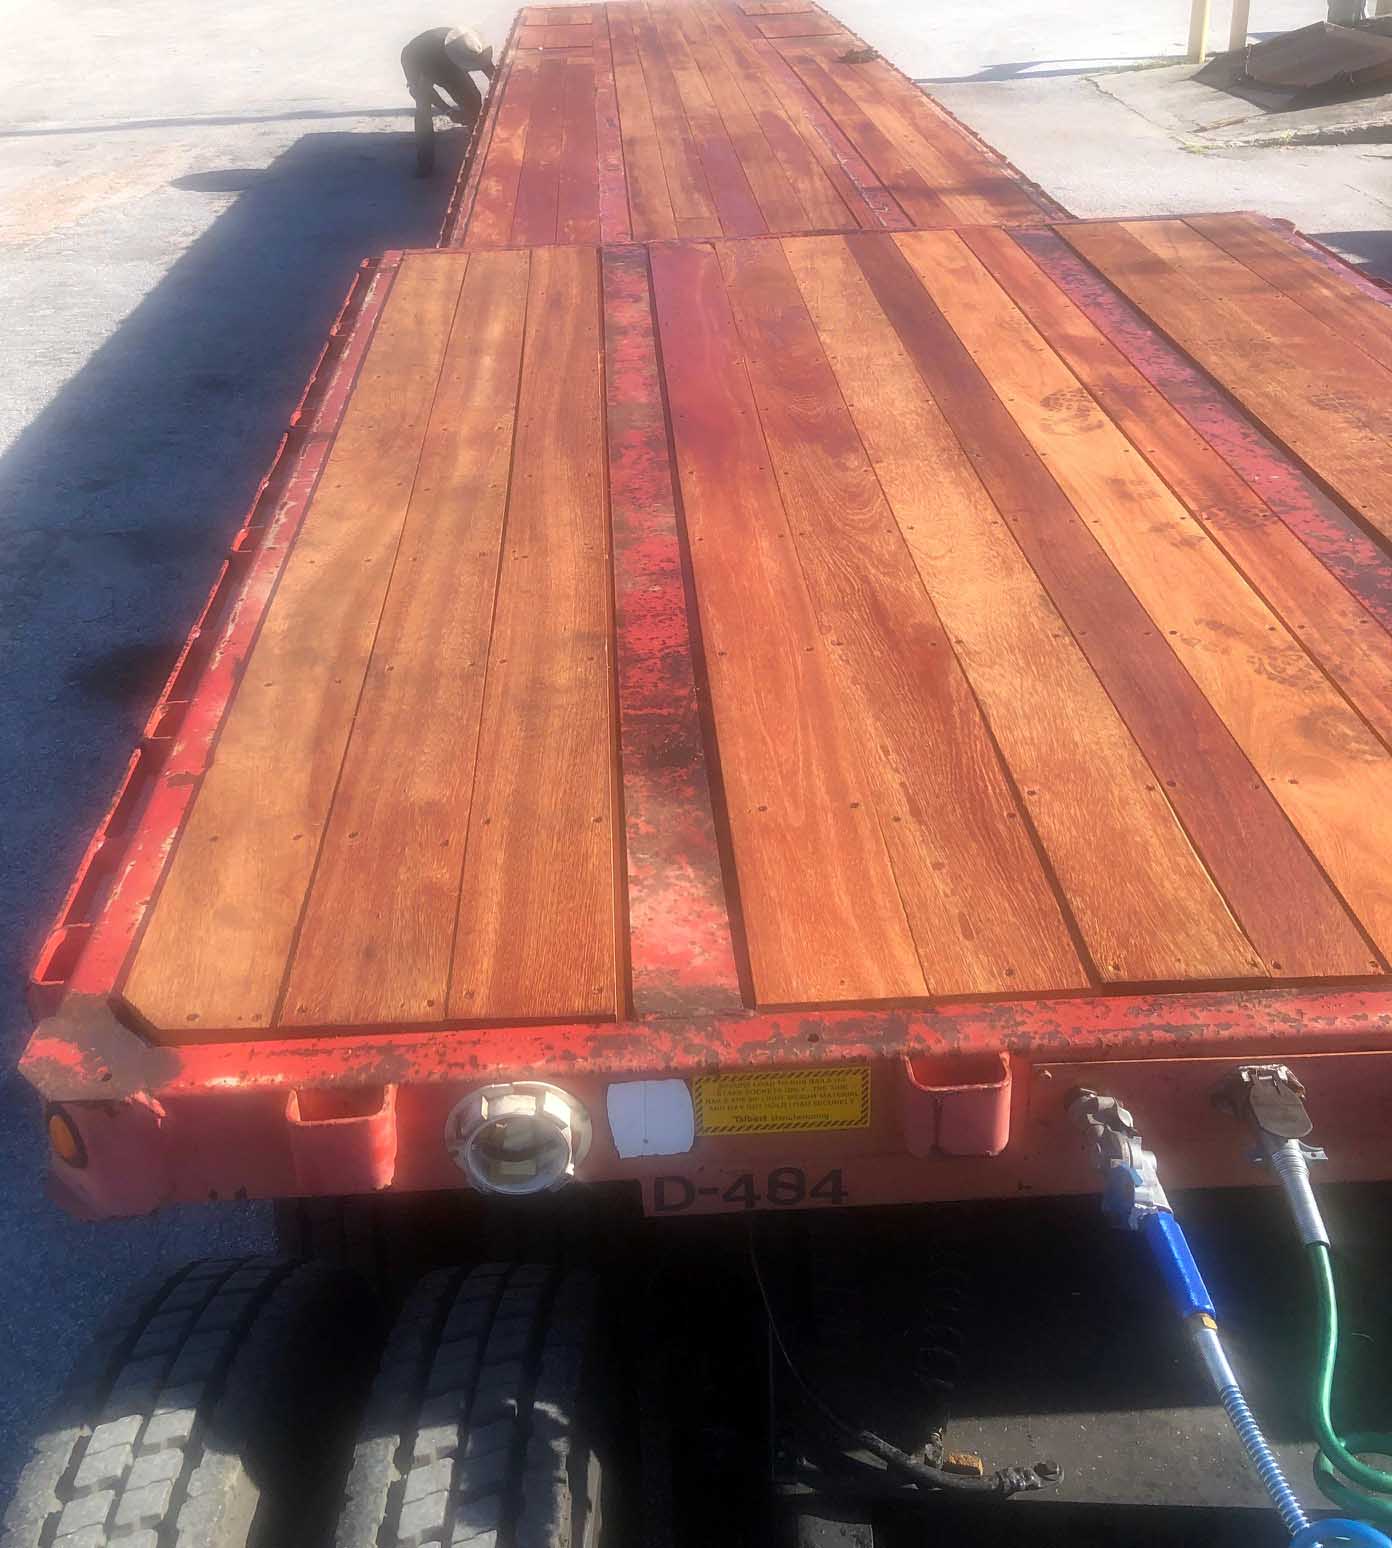 Step deck trailer ready for work